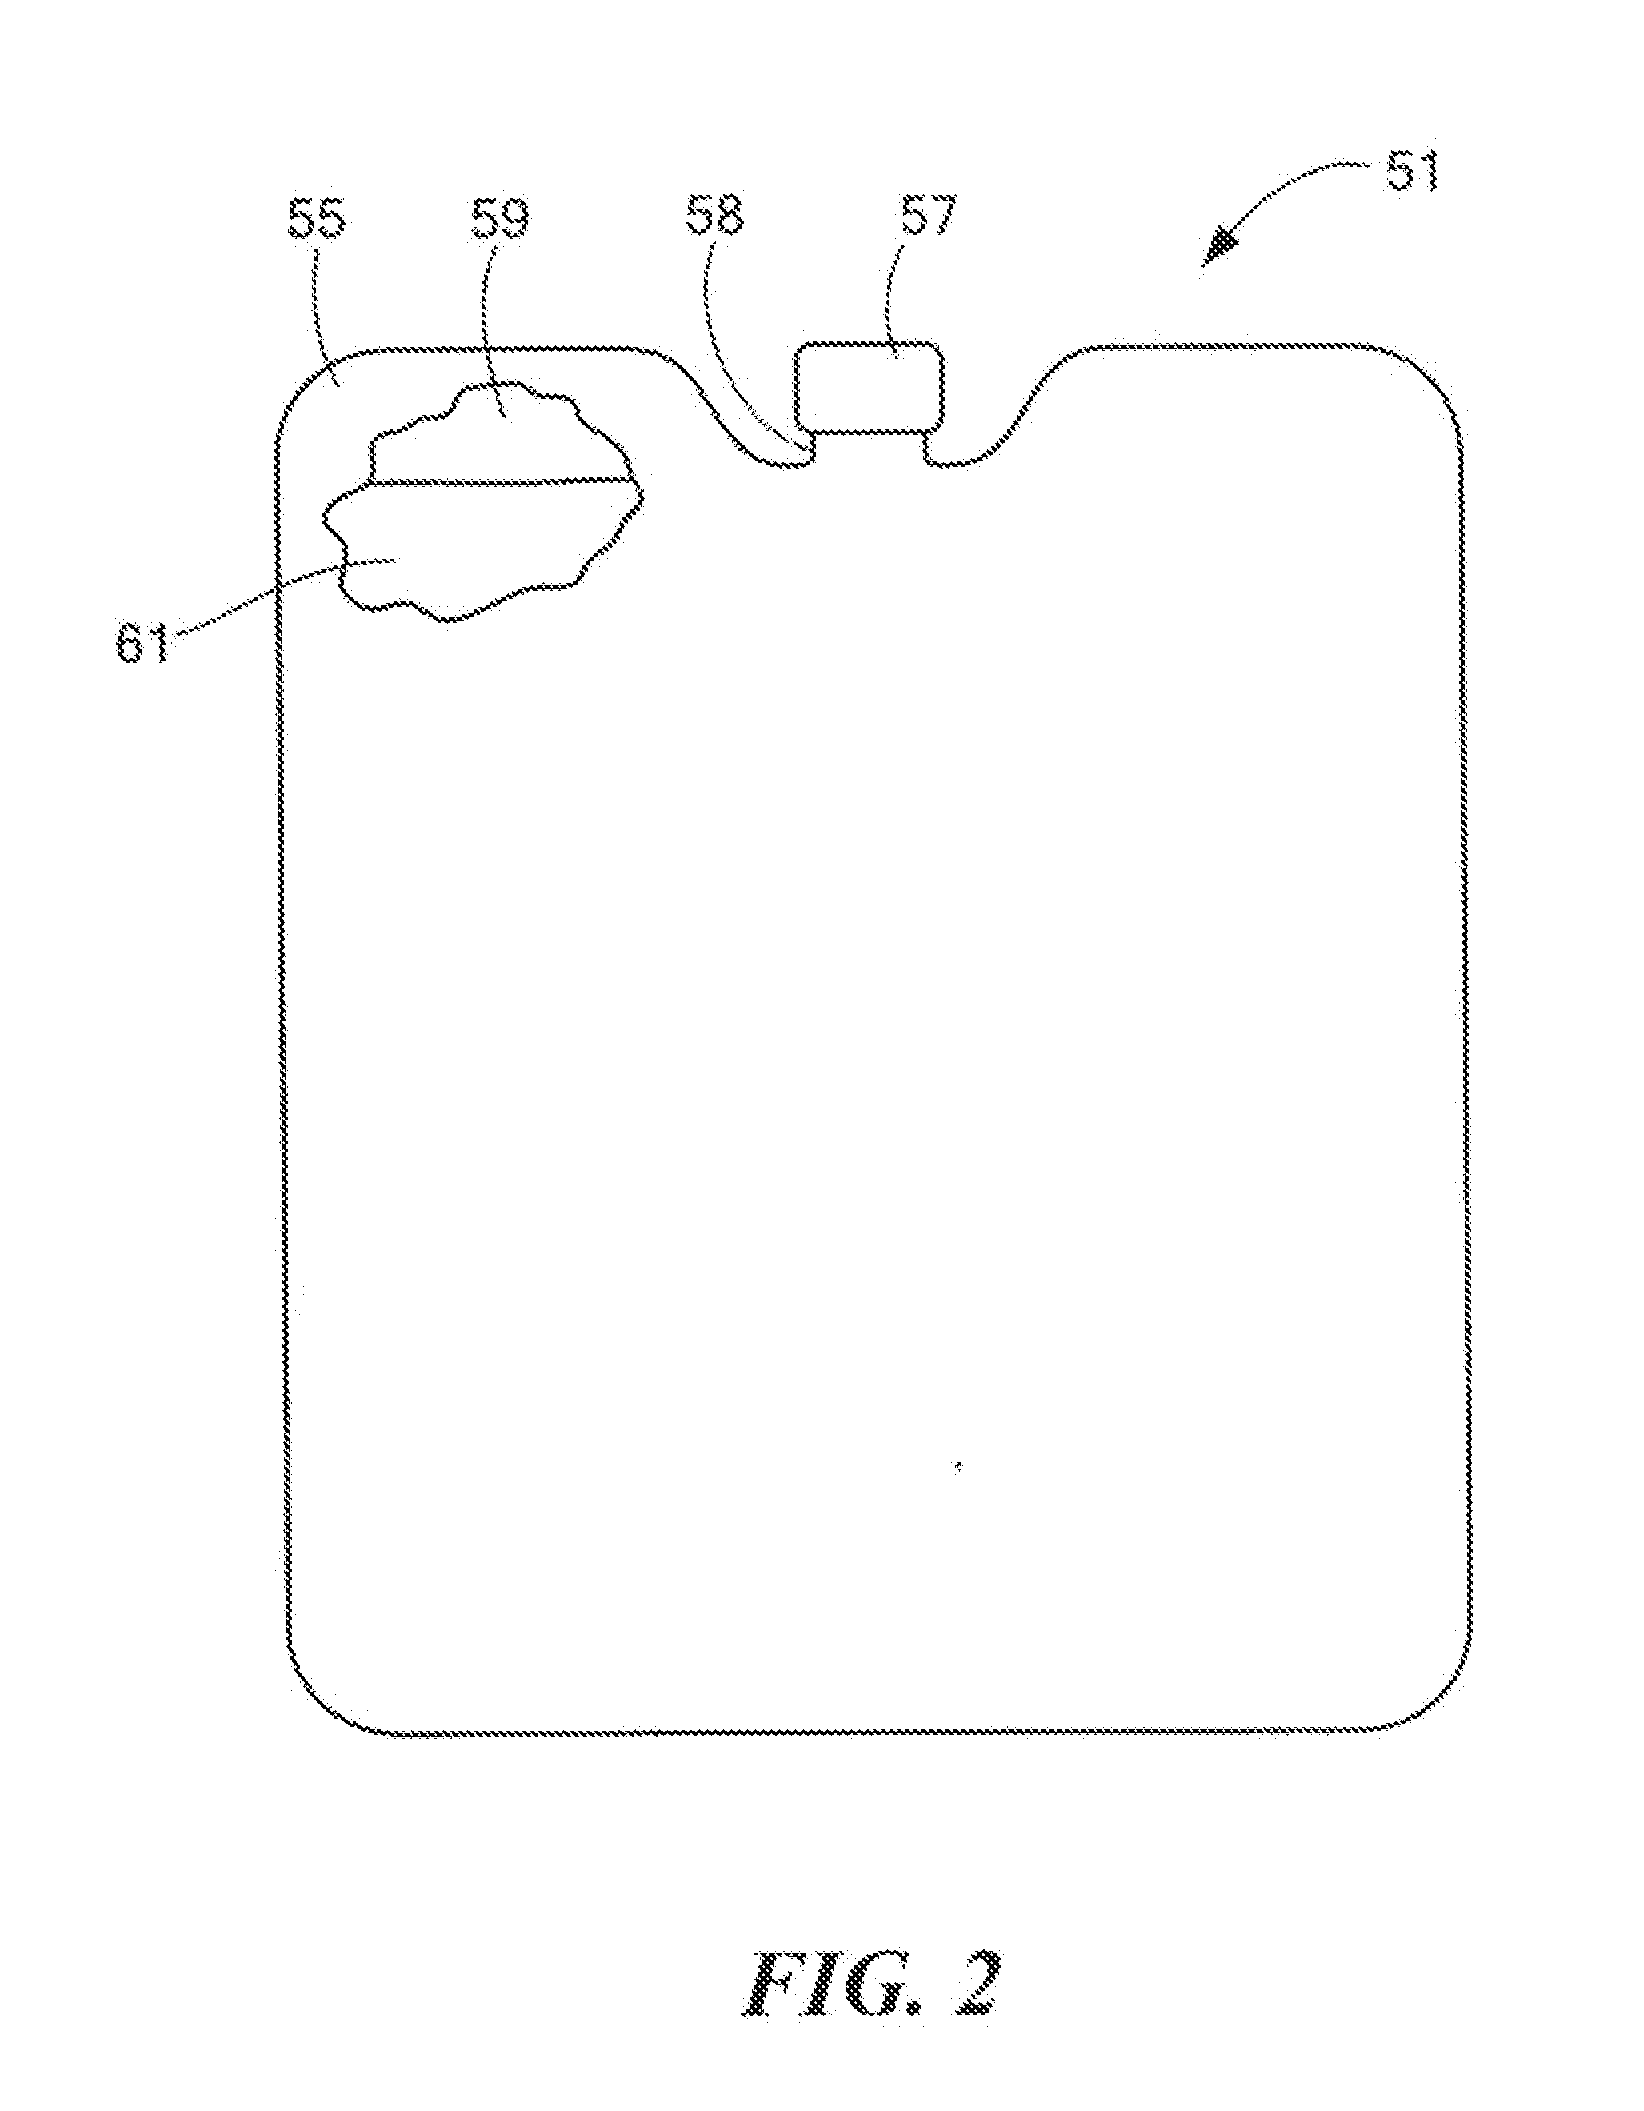 Gel comprising a phase-change material, method of preparing the gel, thermal exchange implement comprising the gel, and method of preparing the thermal exchange implement